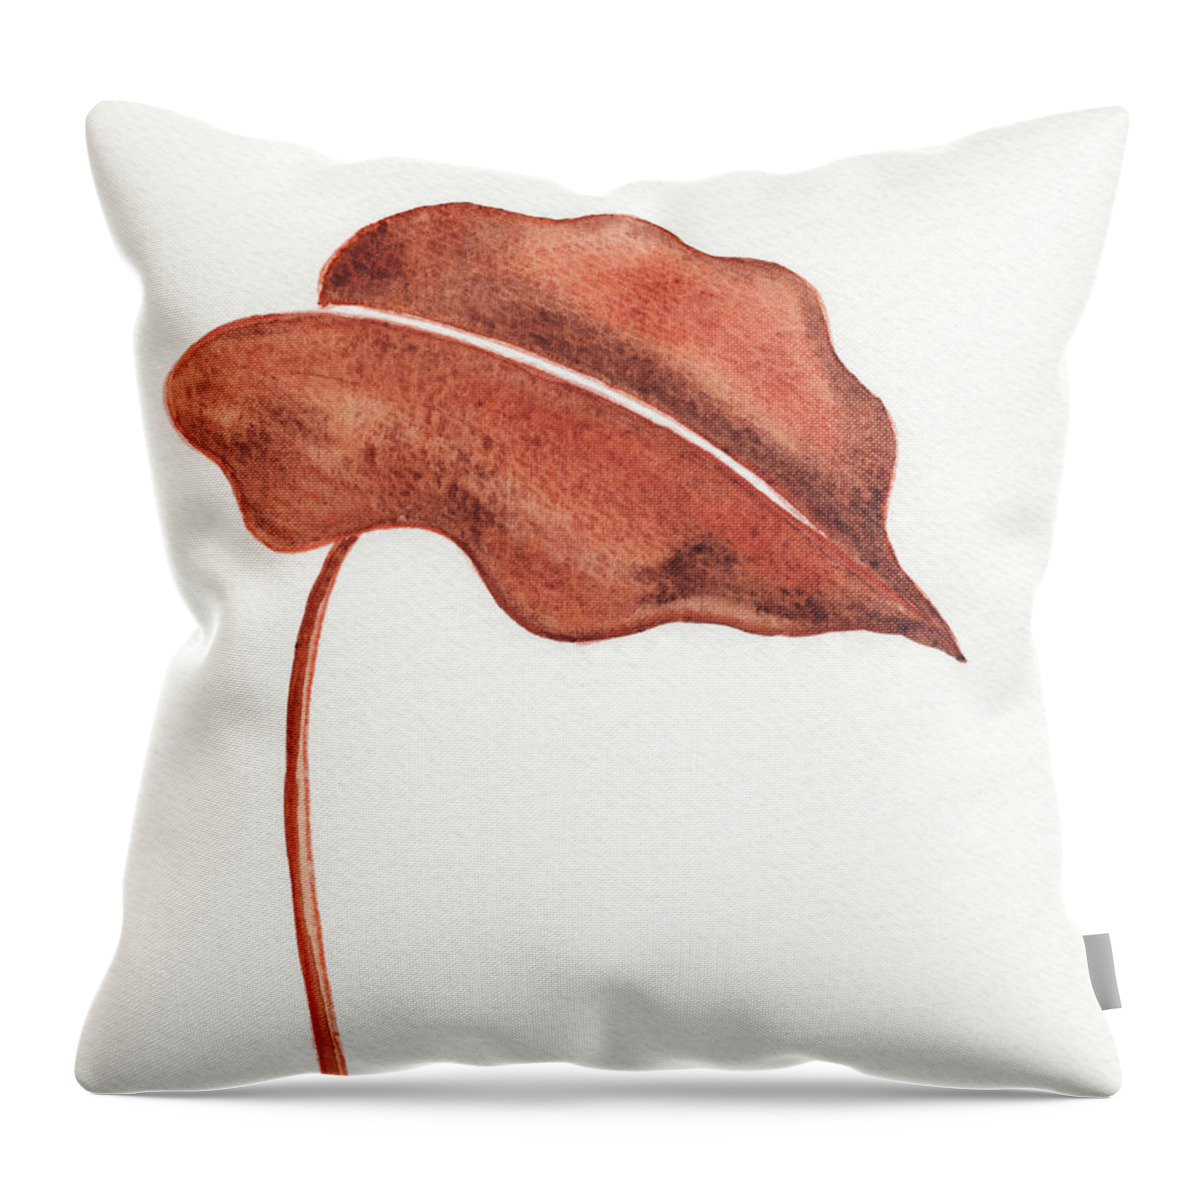 Leaf Throw Pillow featuring the painting Botanical Tropical Watercolor Brown Single Leaf by Irina Sztukowski